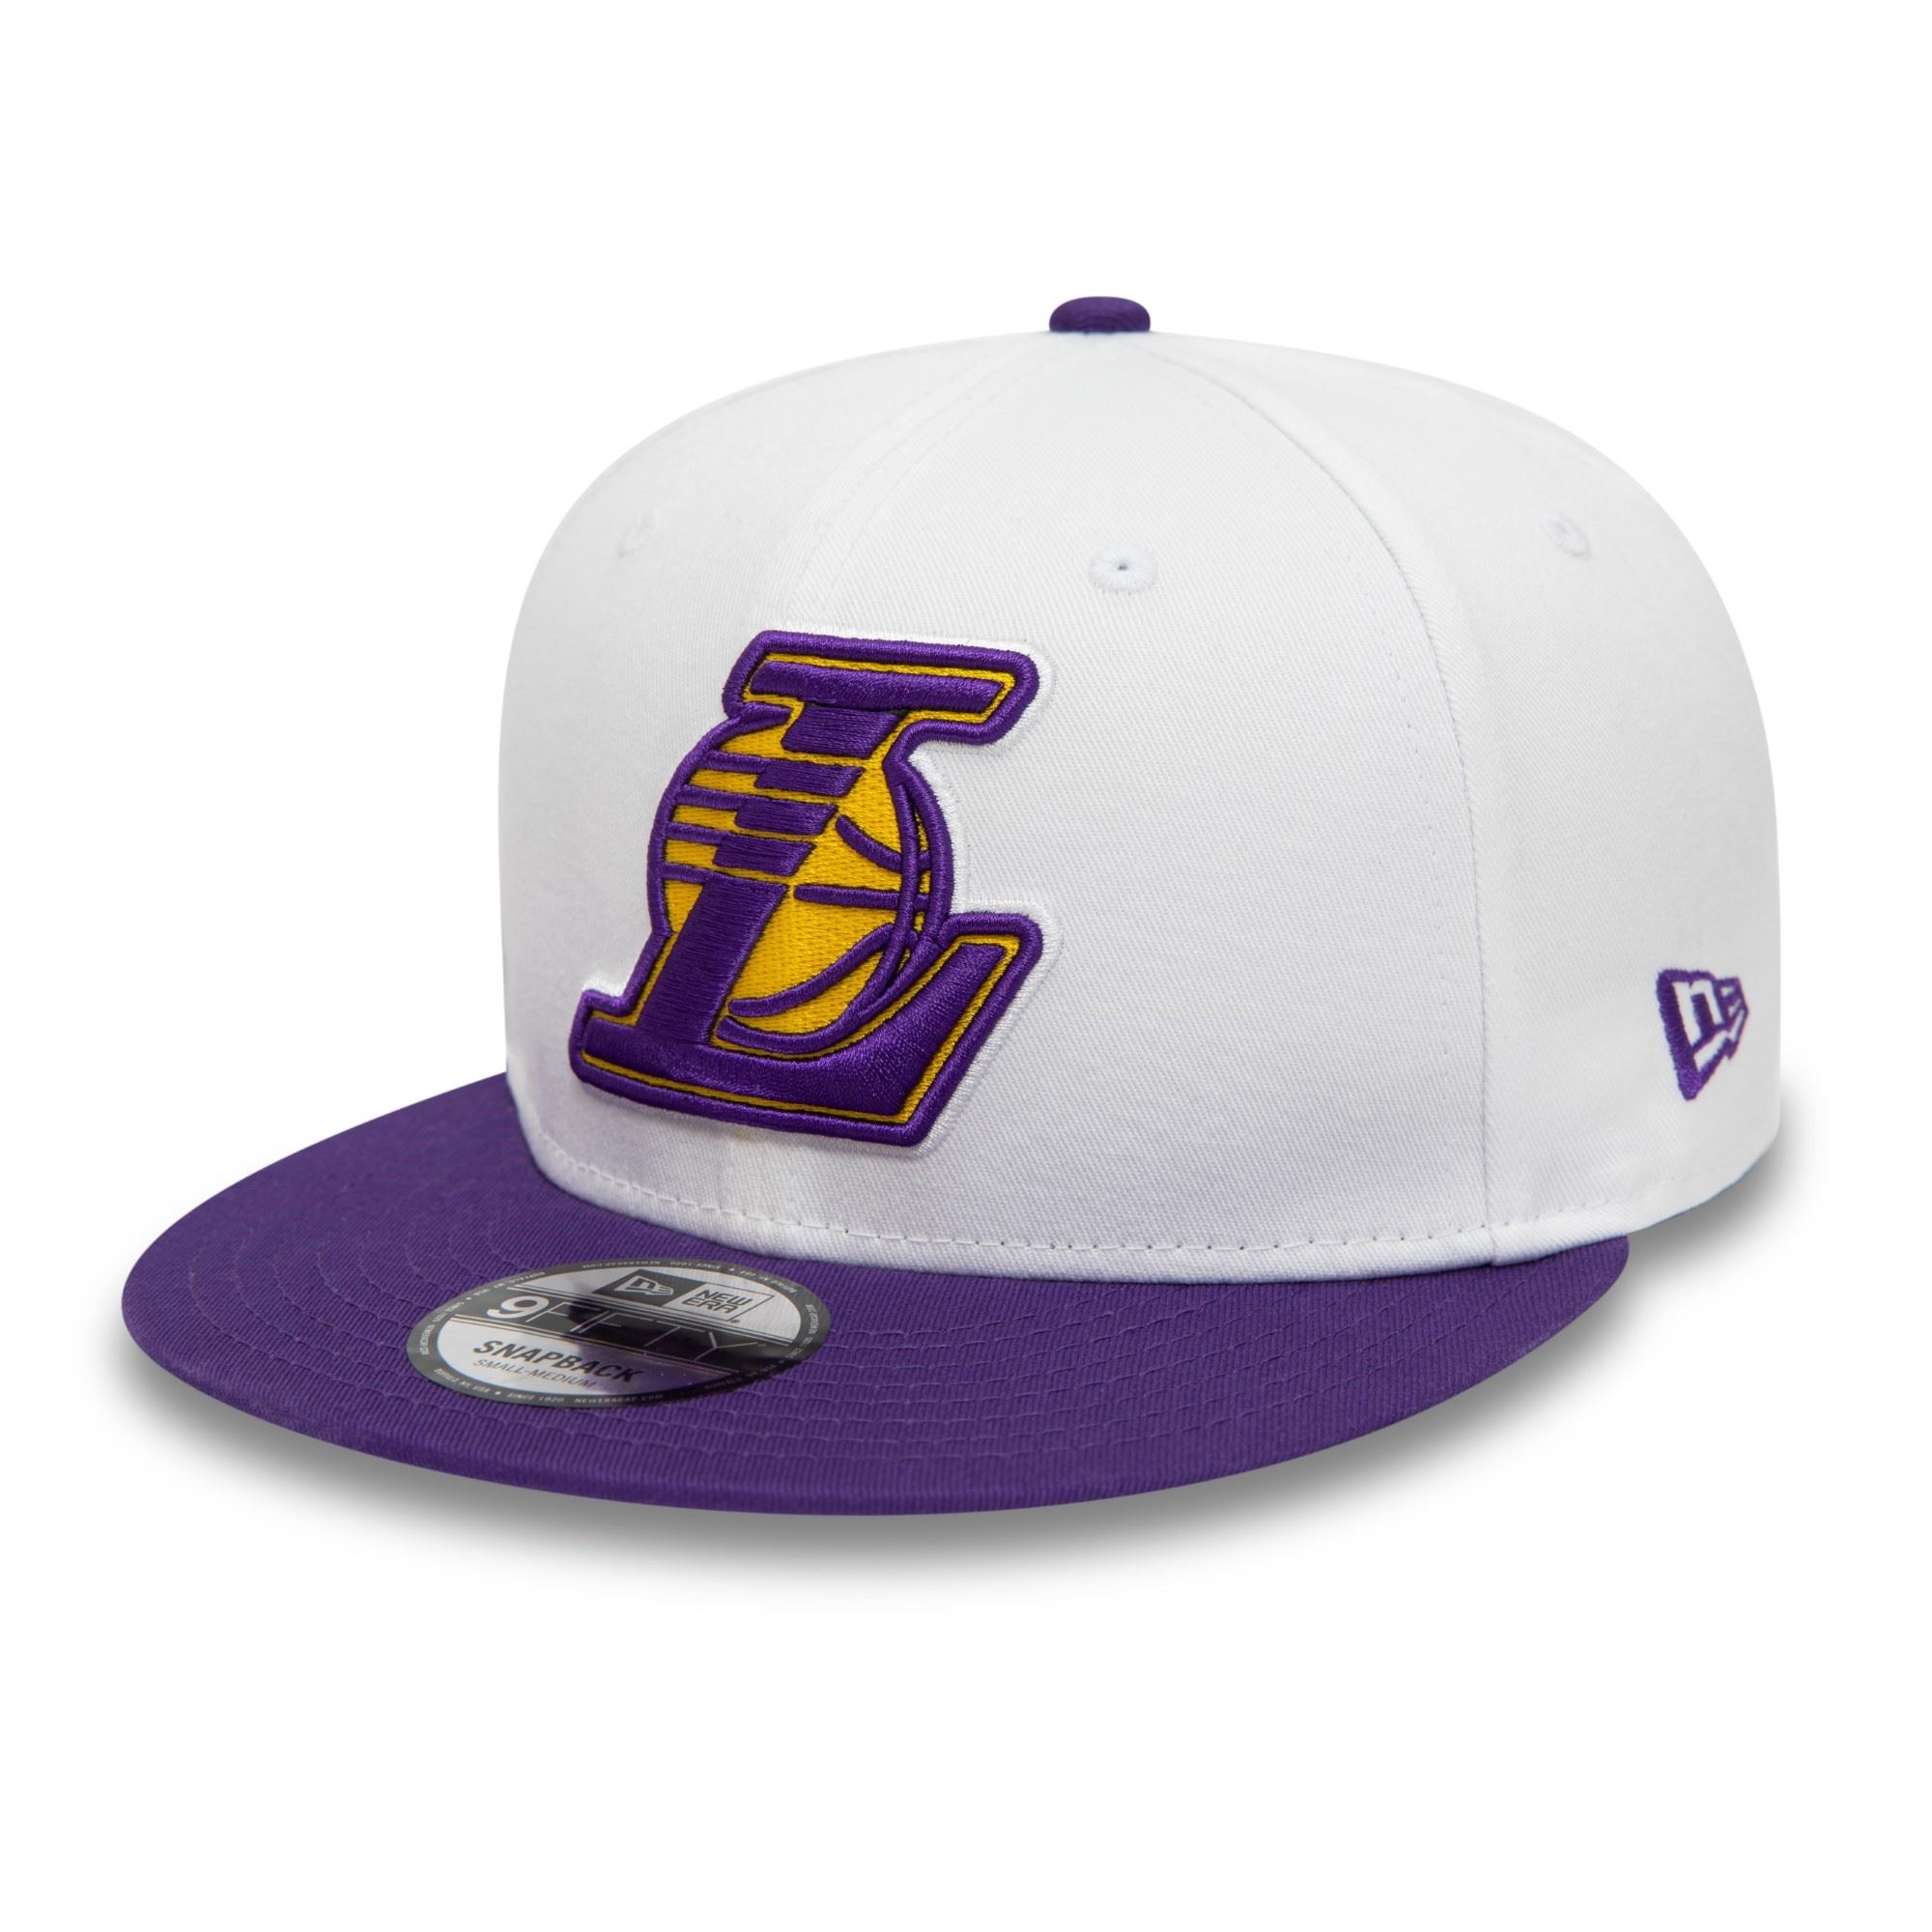 Los Angeles Lakers NBA White Crown Patches White 9Fifty Snapback Cap New Era